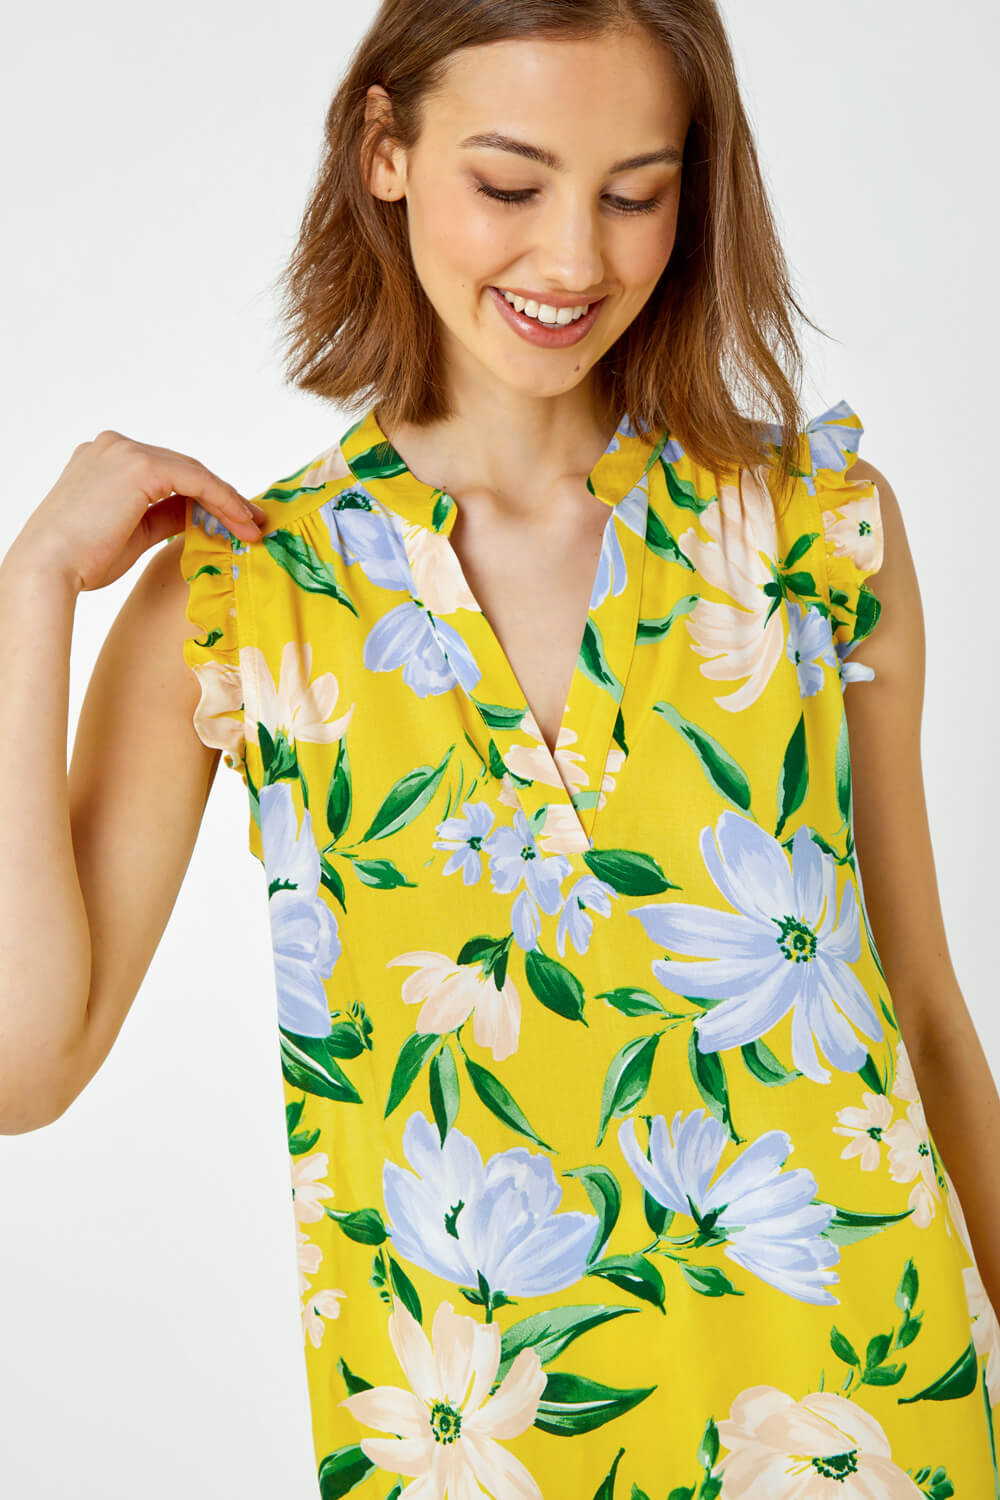 Yellow Floral Print Sleeveless Ruffle Top, Image 4 of 5